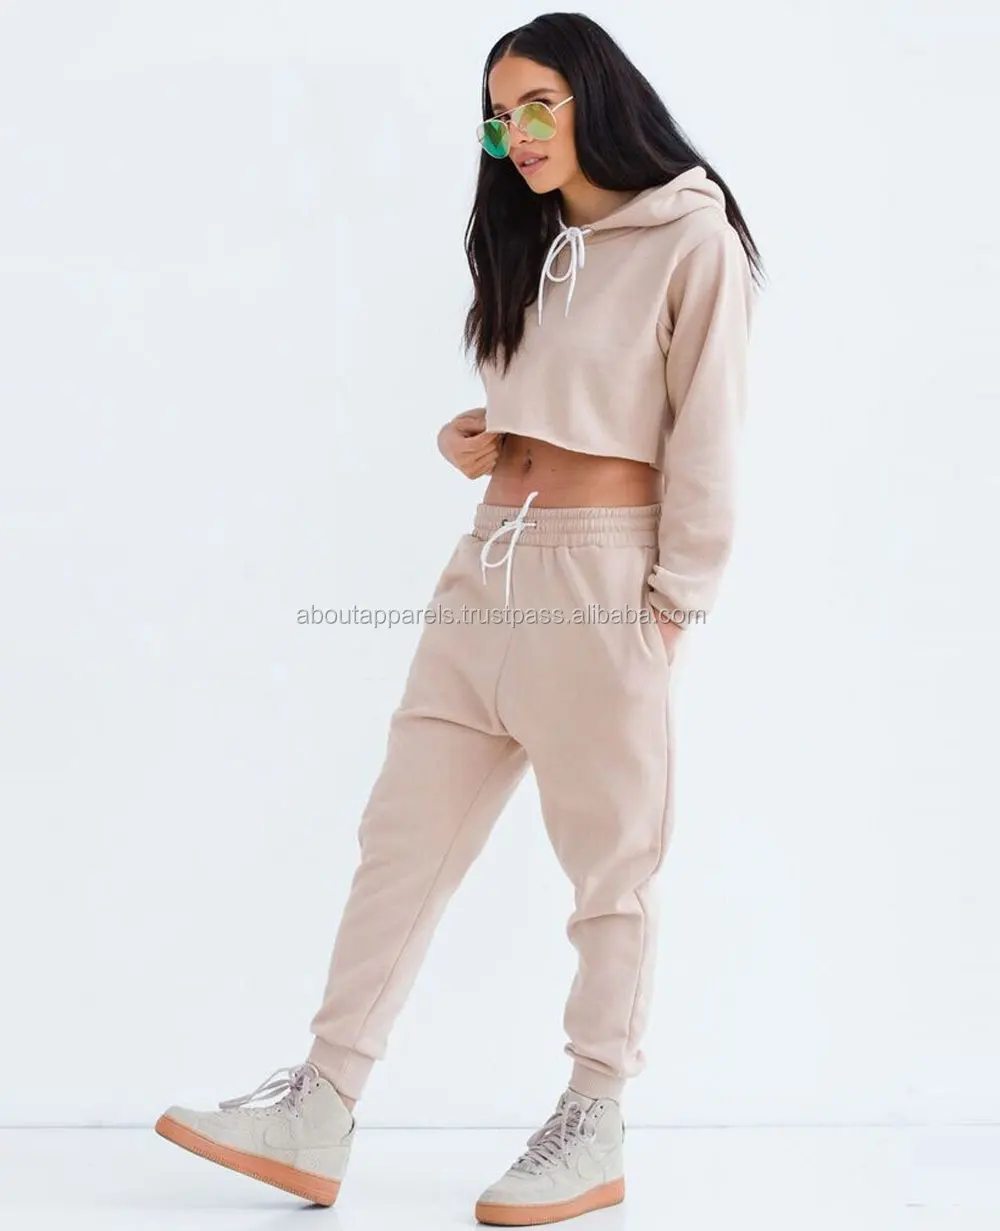 Women's Solid Velour Sweatsuit Set Hoodies and Pants Zip up Jacket Girl/Lady  Sport Suits Tracksuits, View High Fashion Plain New Products Women Sweat  Top Summer Tracksuits, Customer Brand (OEM) Product Details from